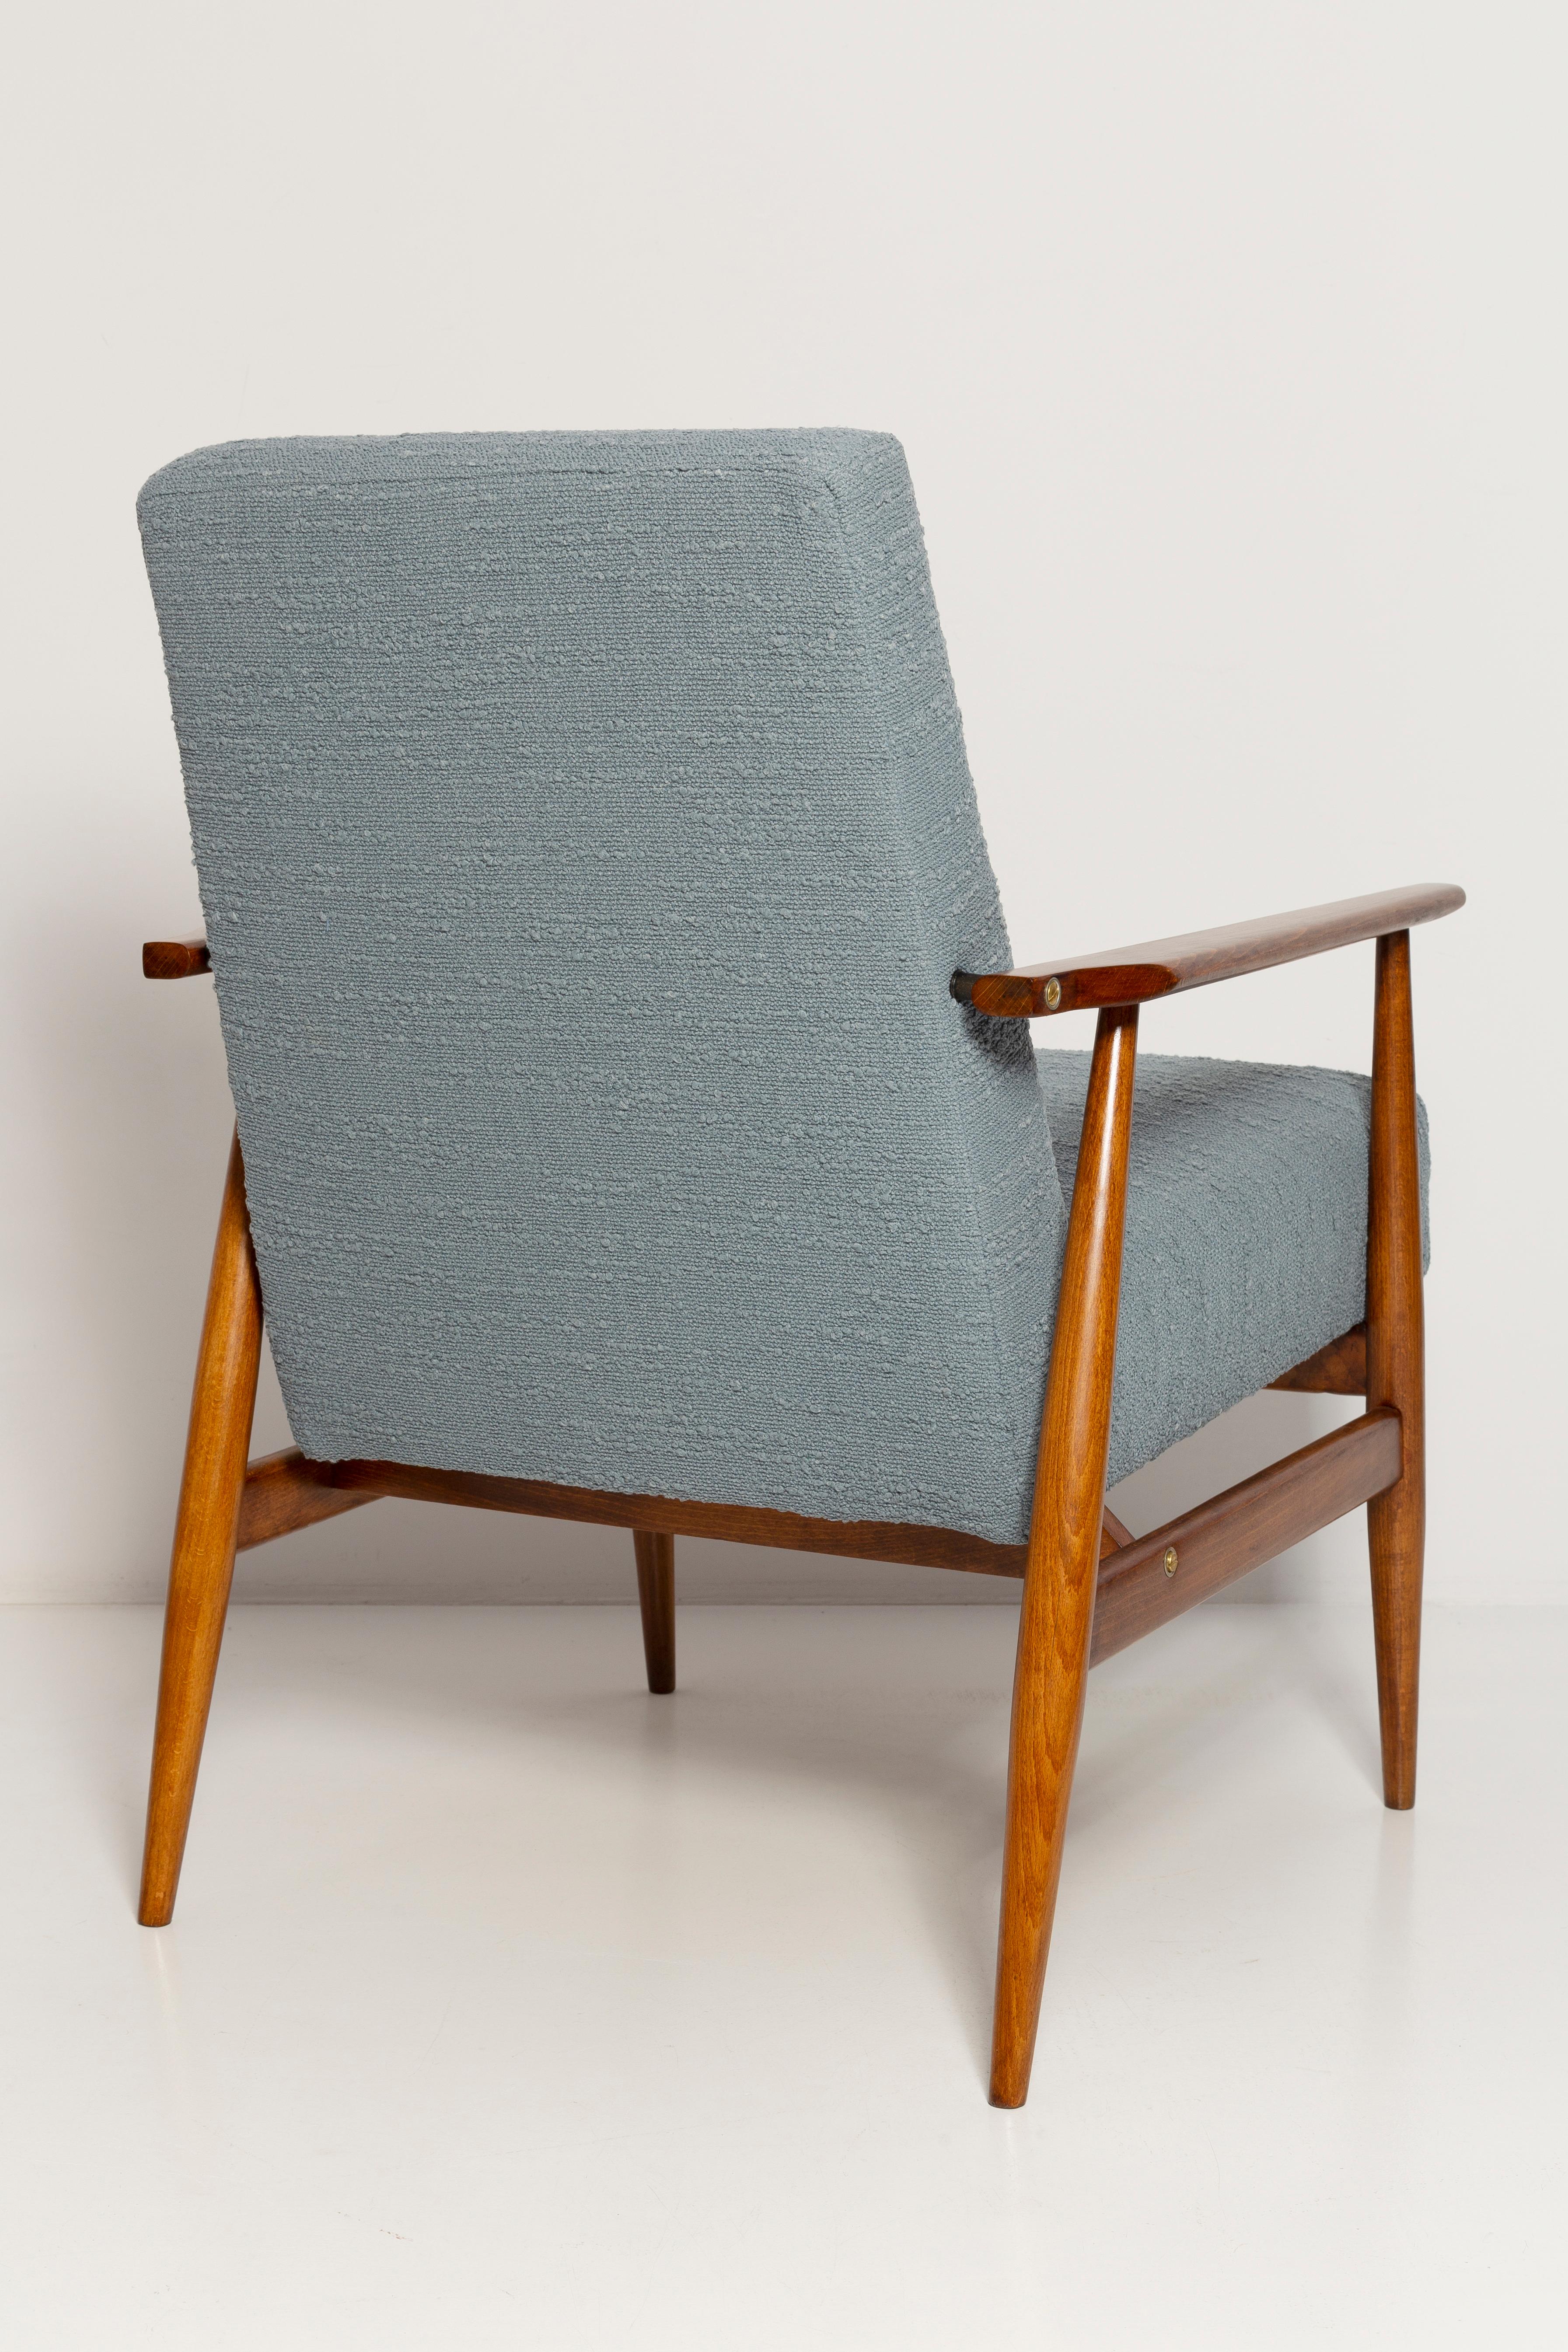 Set of Two Mid-Century Gray Blue Boucle Dante Armchairs, H. Lis, 1960s For Sale 2